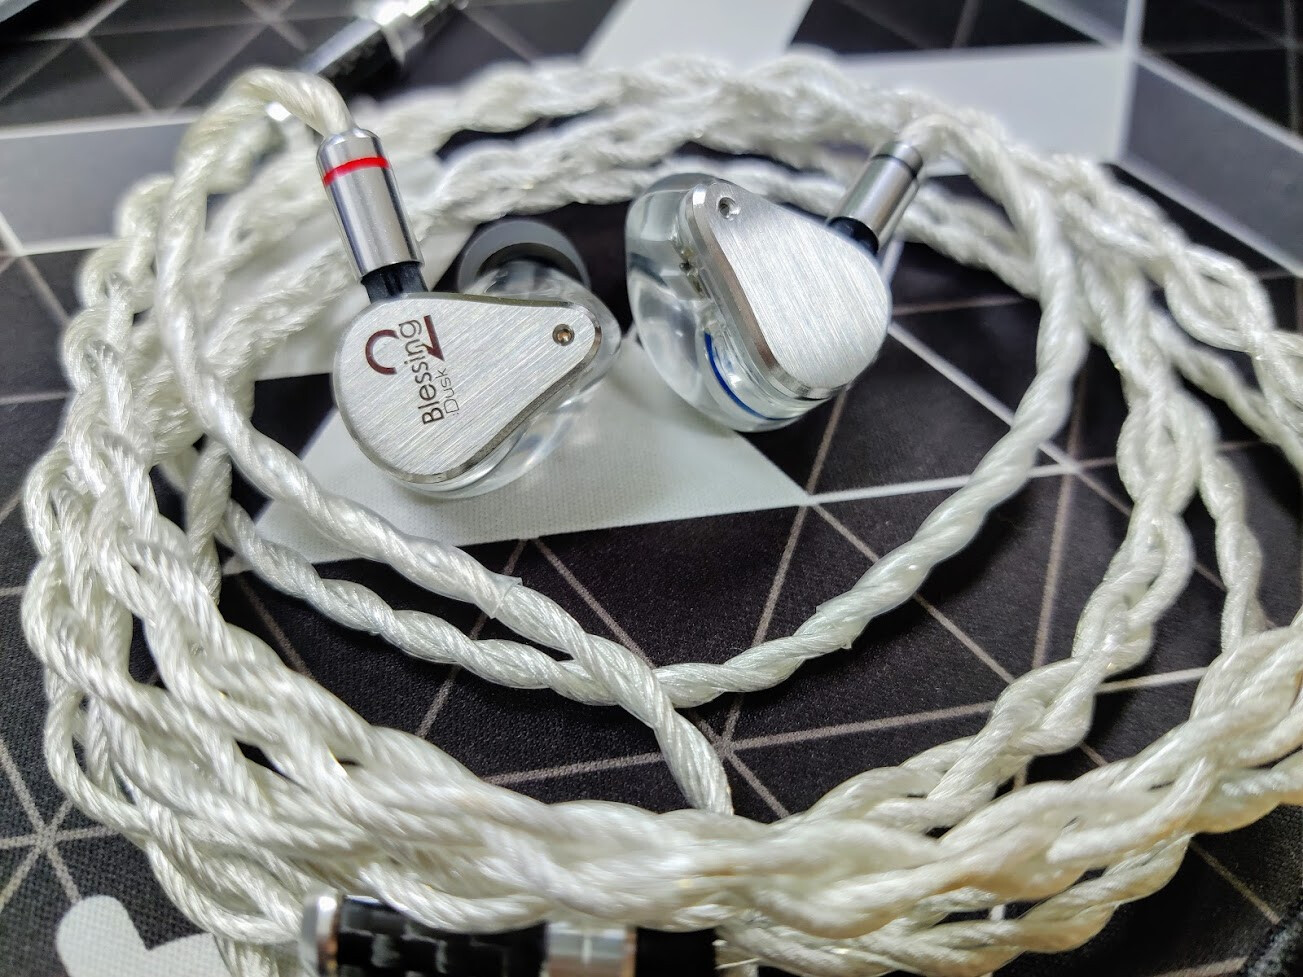 Moondrop Blessing 2 : Dusk - In-Ear Monitors (IEM) - HifiGuides Forums